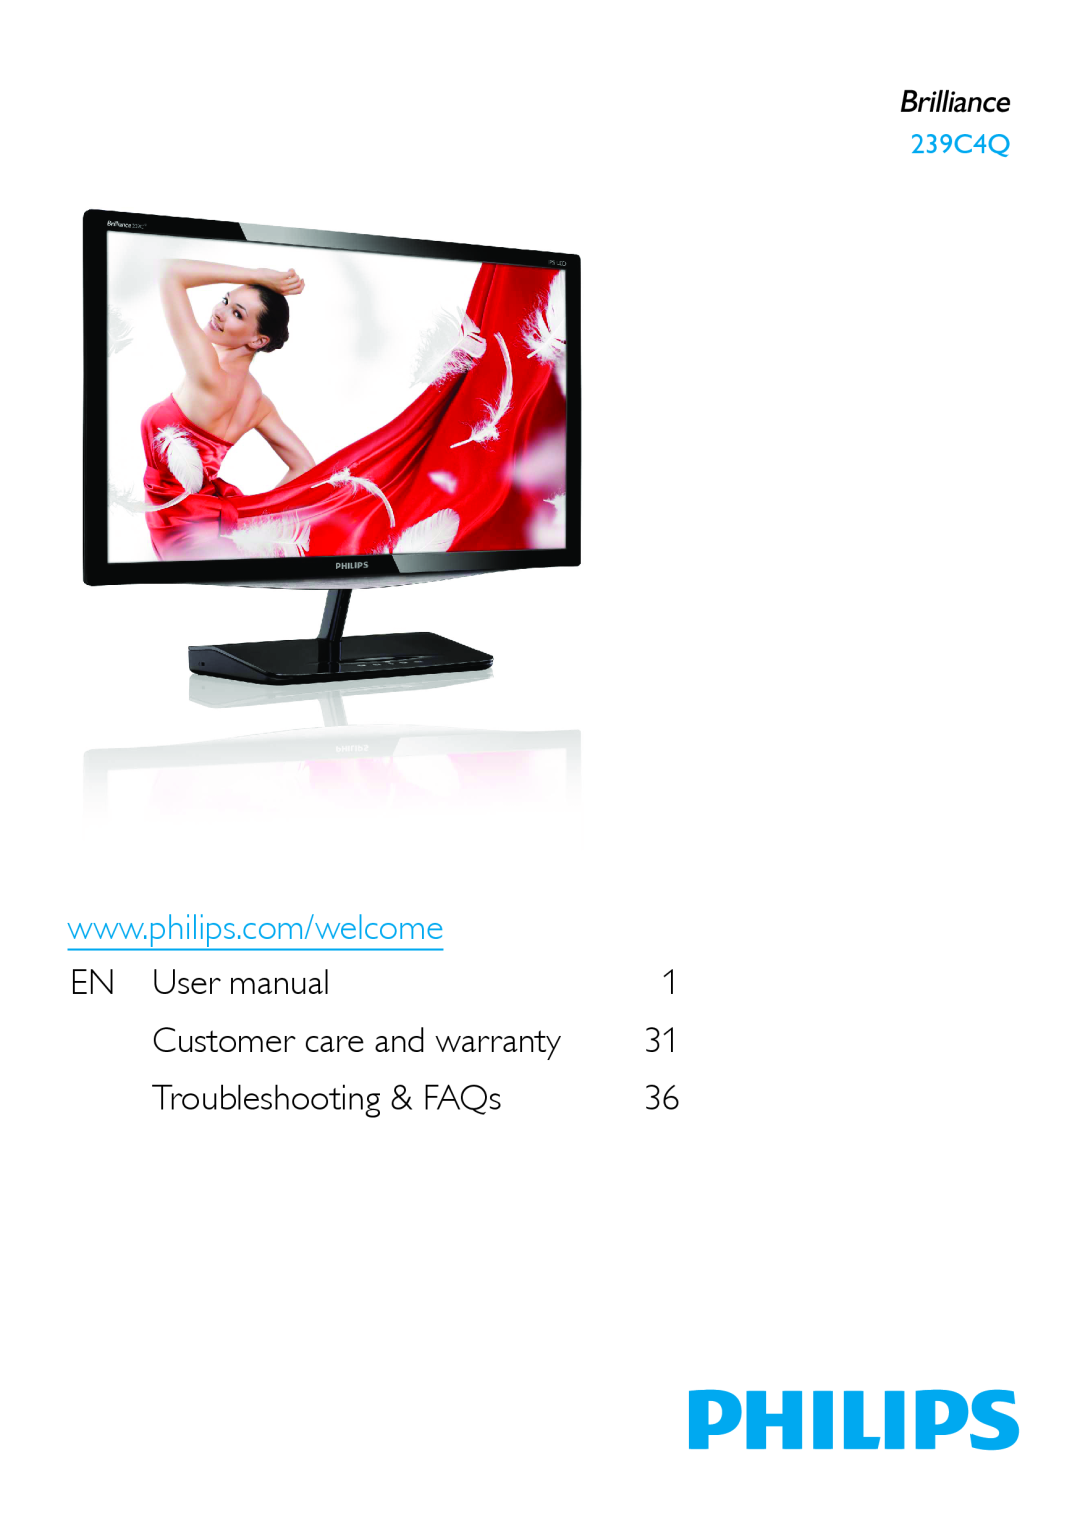 Philips 239C4Q warranty EN User manual, Troubleshooting & FAQs, Customer care and warranty 